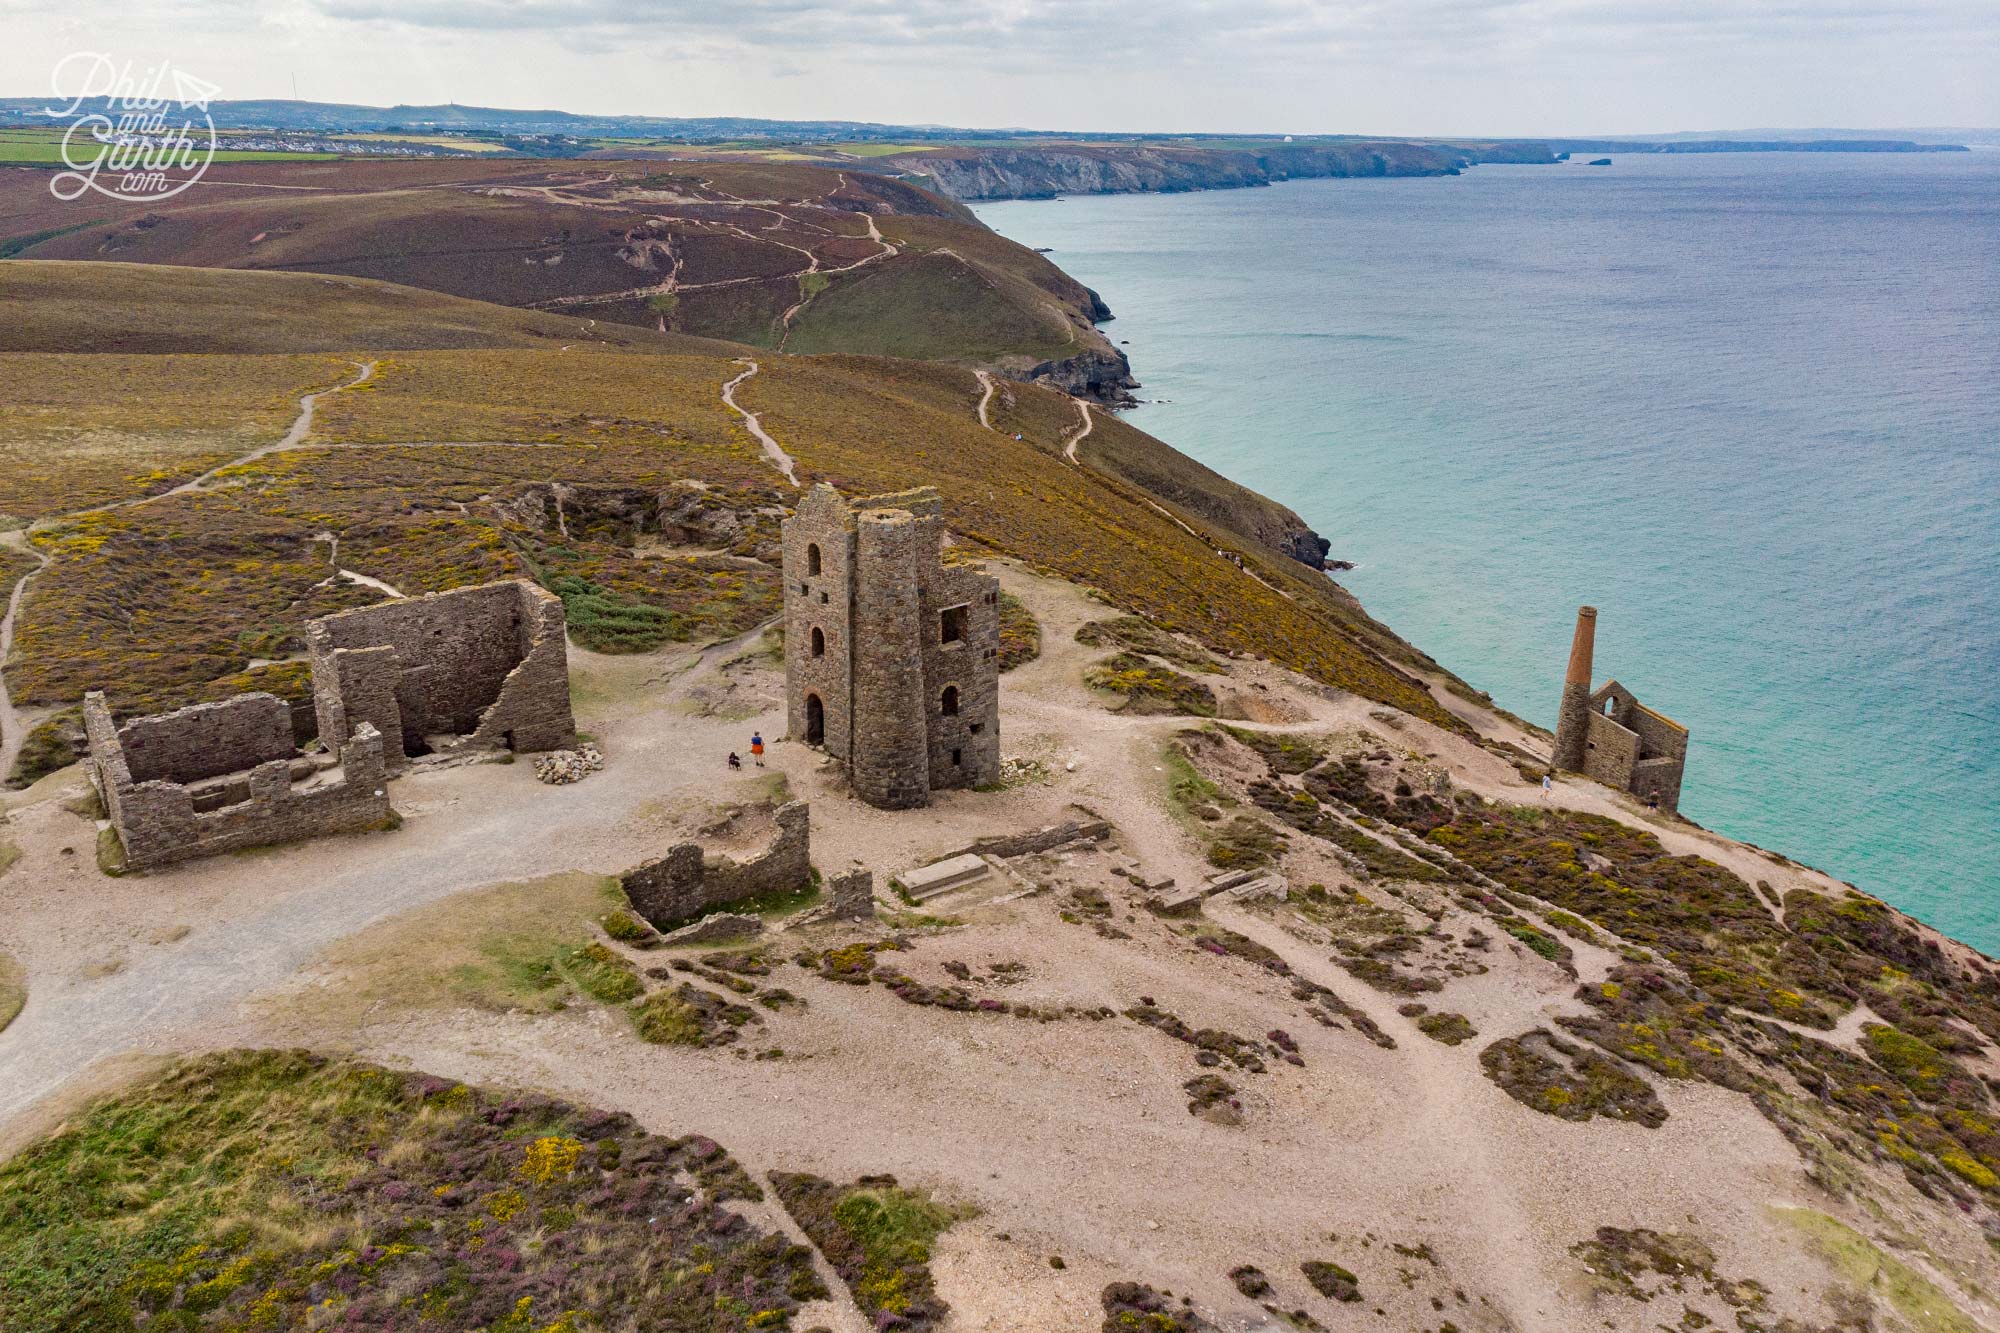 The Wheal Coates tin mine opened in 1802 and closed in 1889